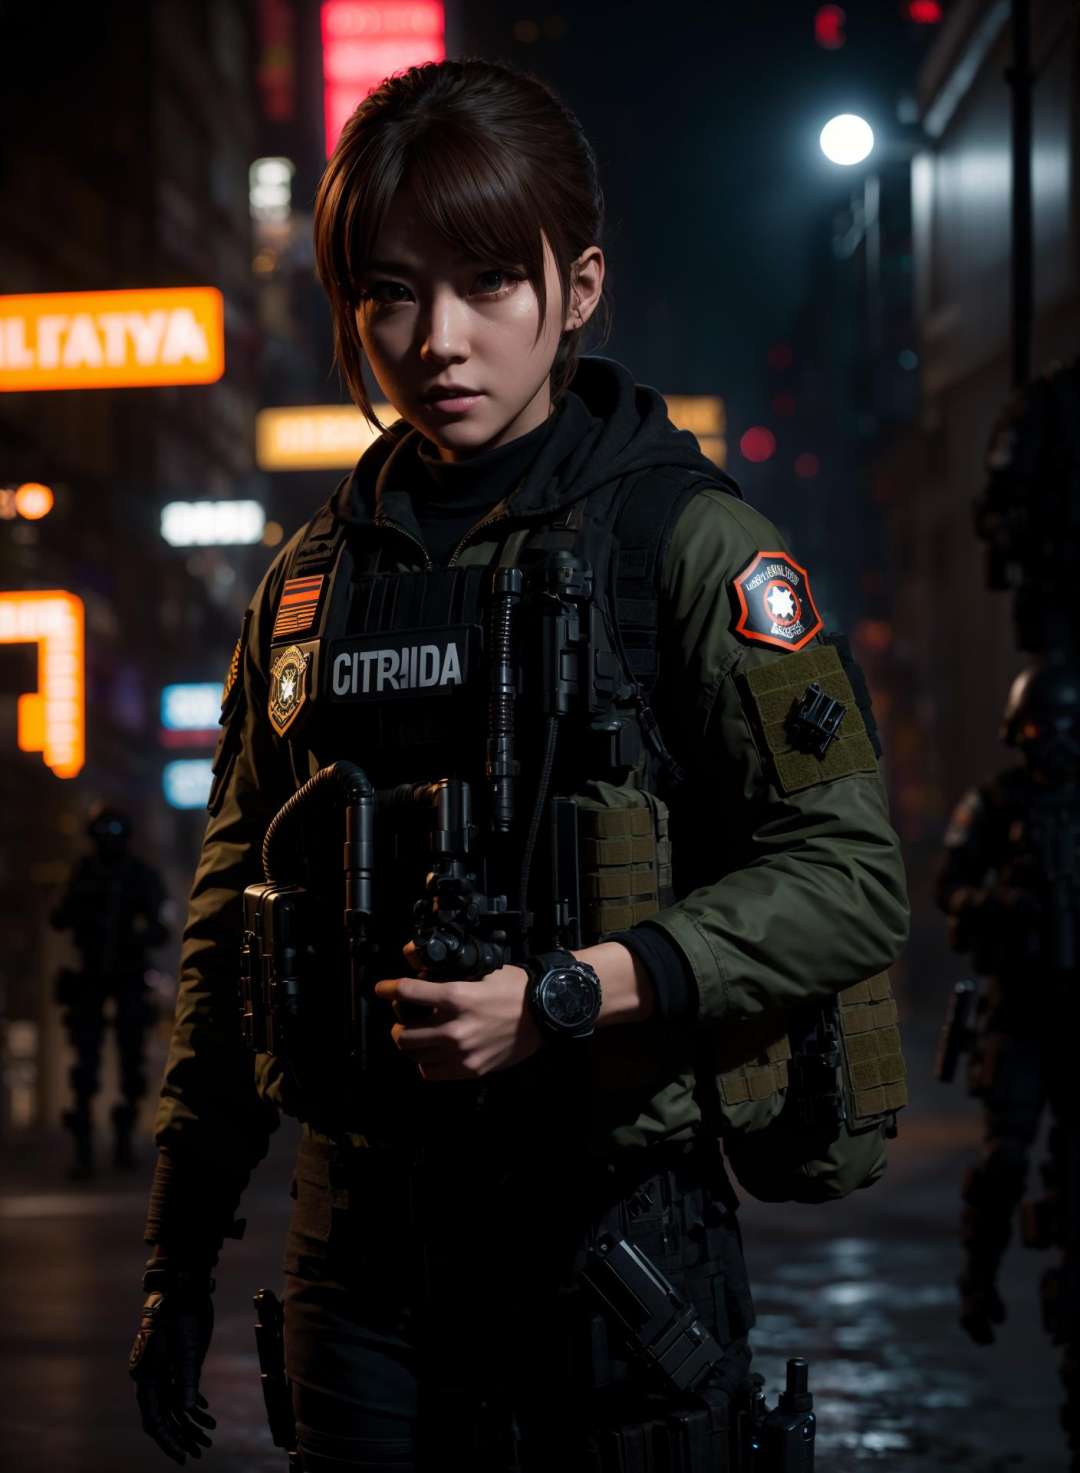 newyork city in biohazard environment , special forces soldier style // delicate colorful 3D model of anime girl cosplay as an agent in The Division series game, tacticool agent outfit, fantasy model